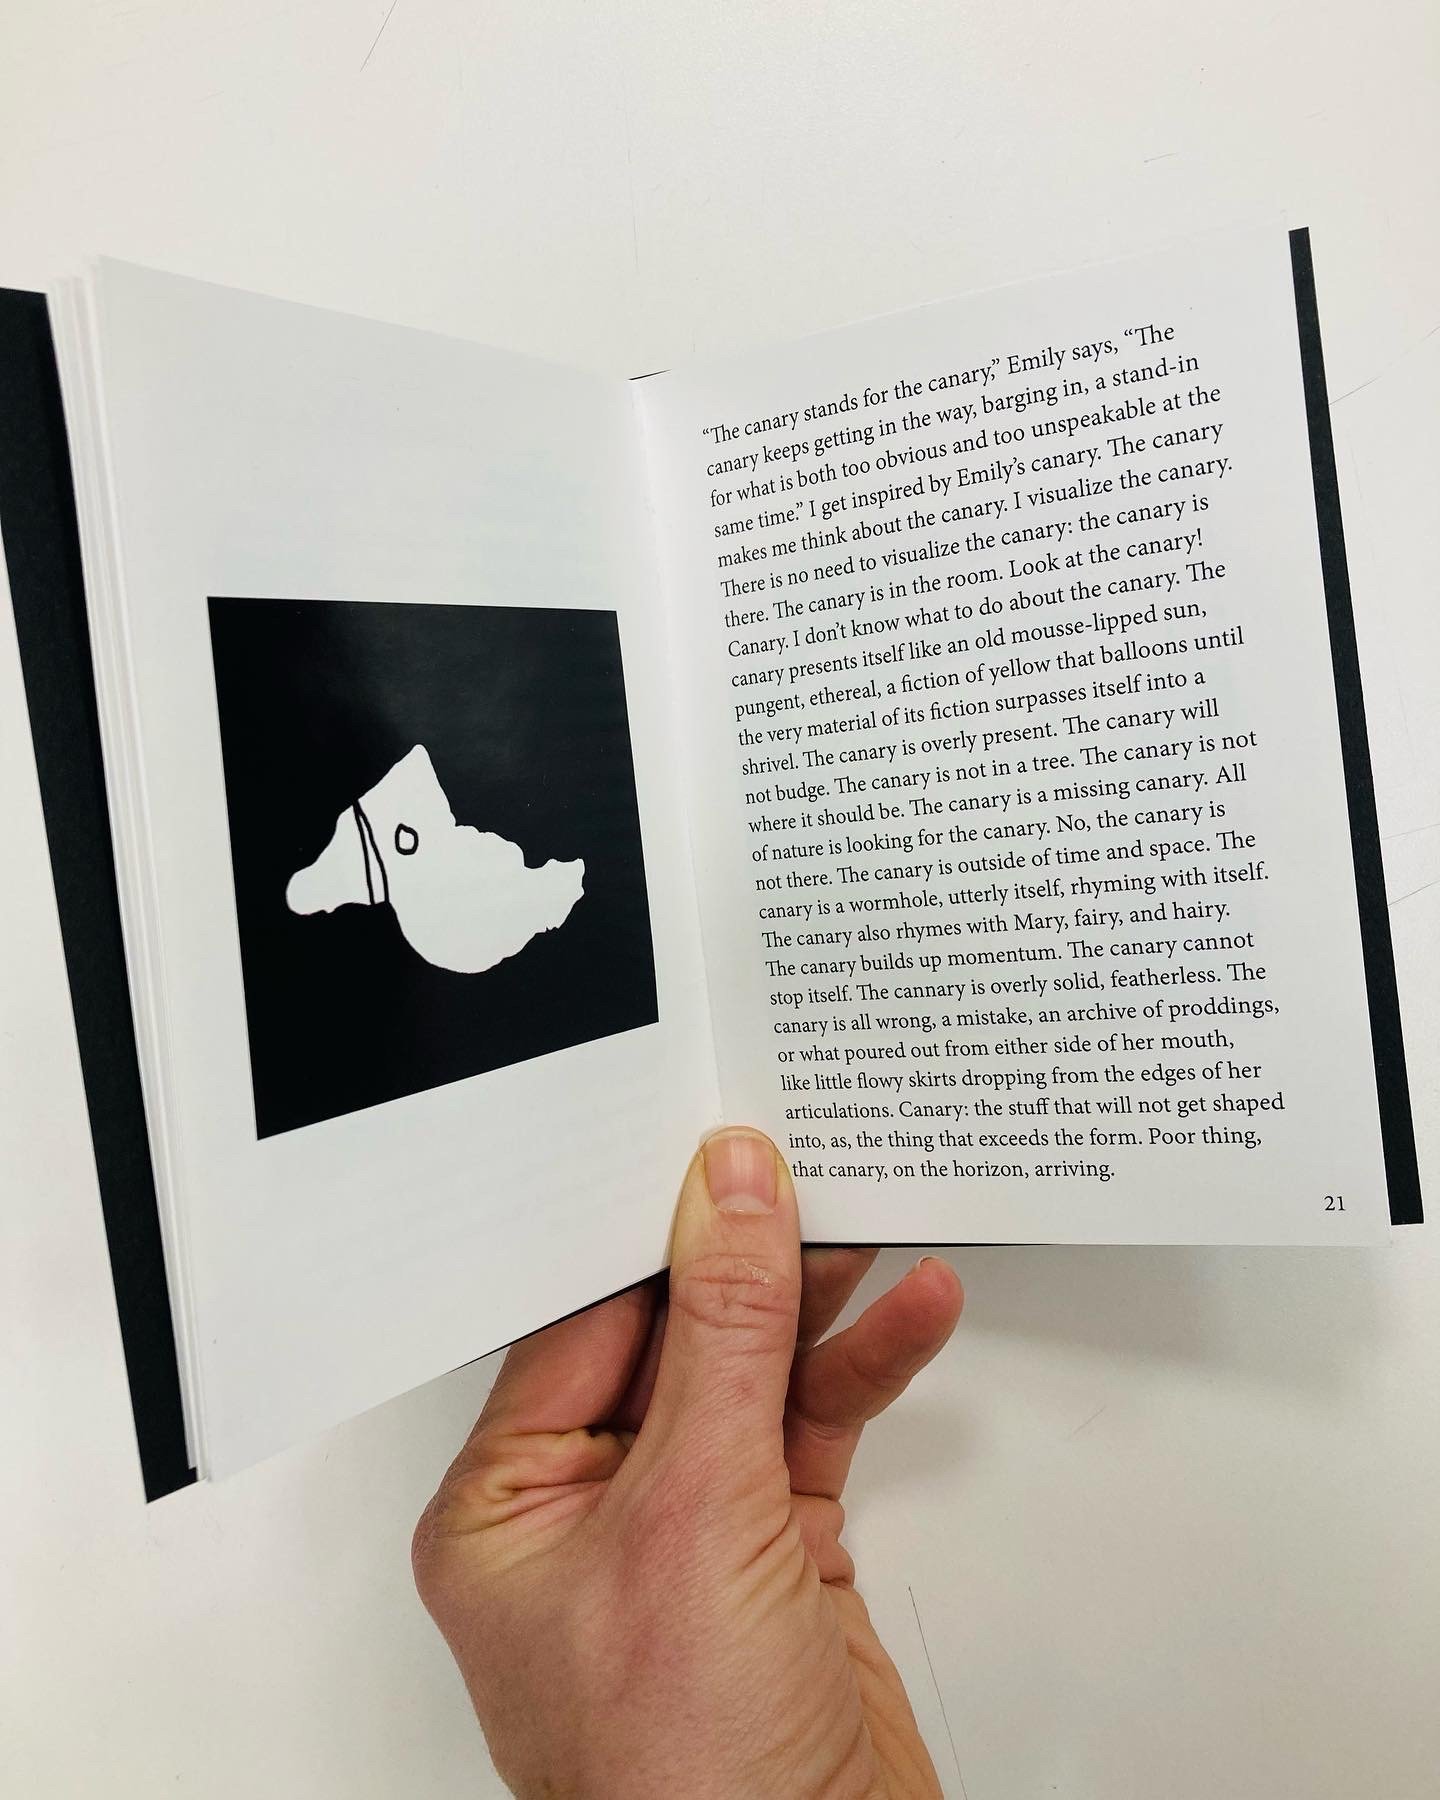  Artist book of “Amok” (Detail), collection of illustrations of each sculpture in the show paired with text composed for each sculpture, Hand-bound Limited Edition 